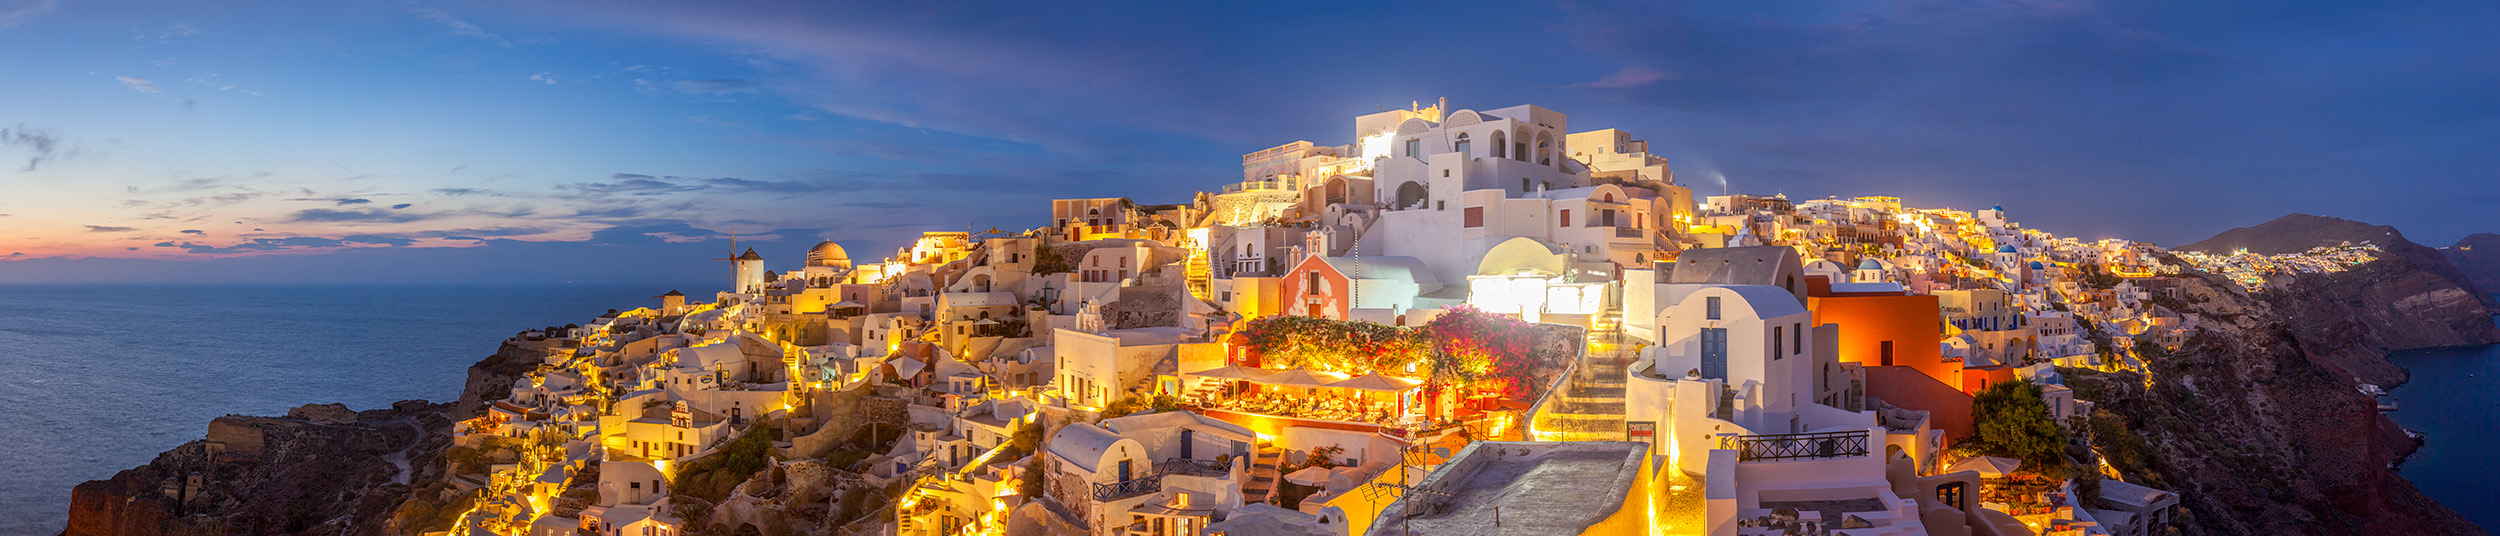 Capturing the essence of Oia, Santorini, Greece during blue hour was a moment of sheer delight. With a 9-image panoramic stitch...